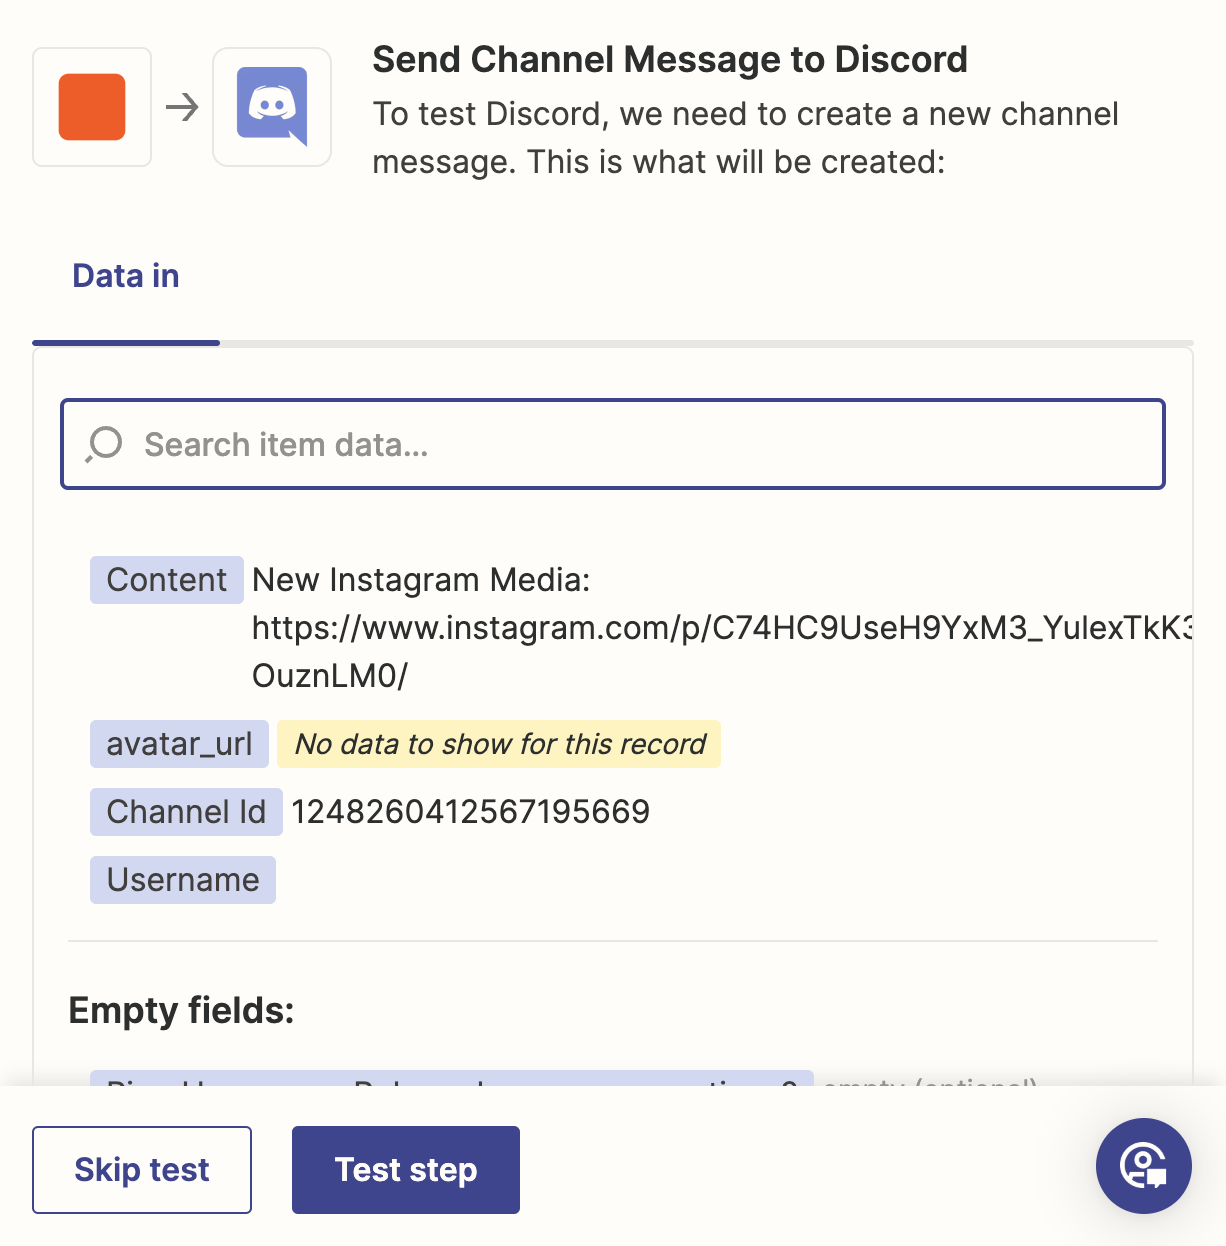 A test in the Zap editor that shows a channel message sent to Discord from an Instagram post.